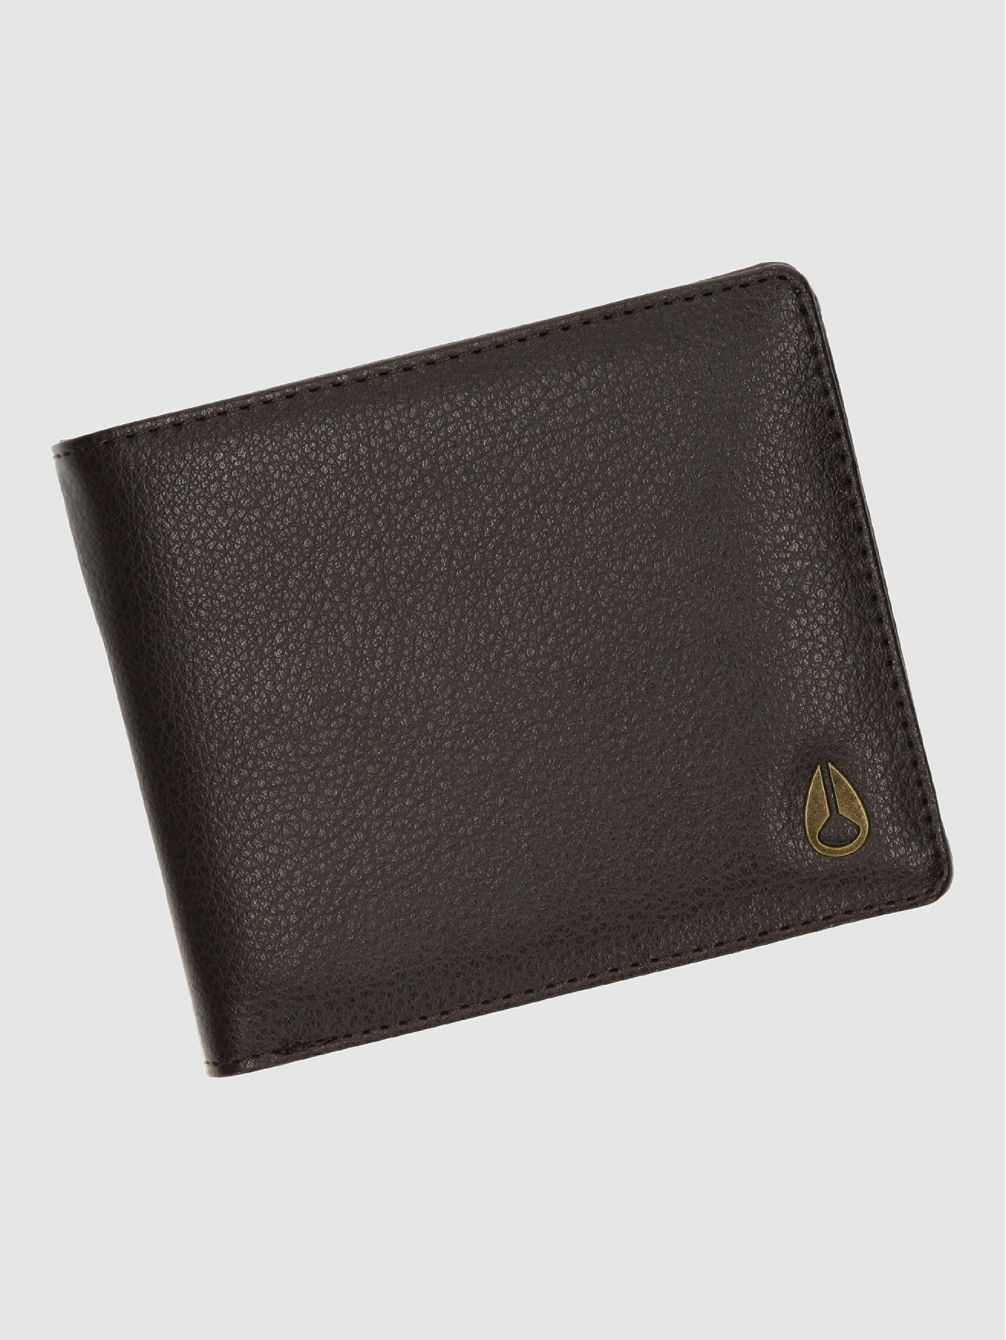 Pass Vegan Leather Coin Portefeuille